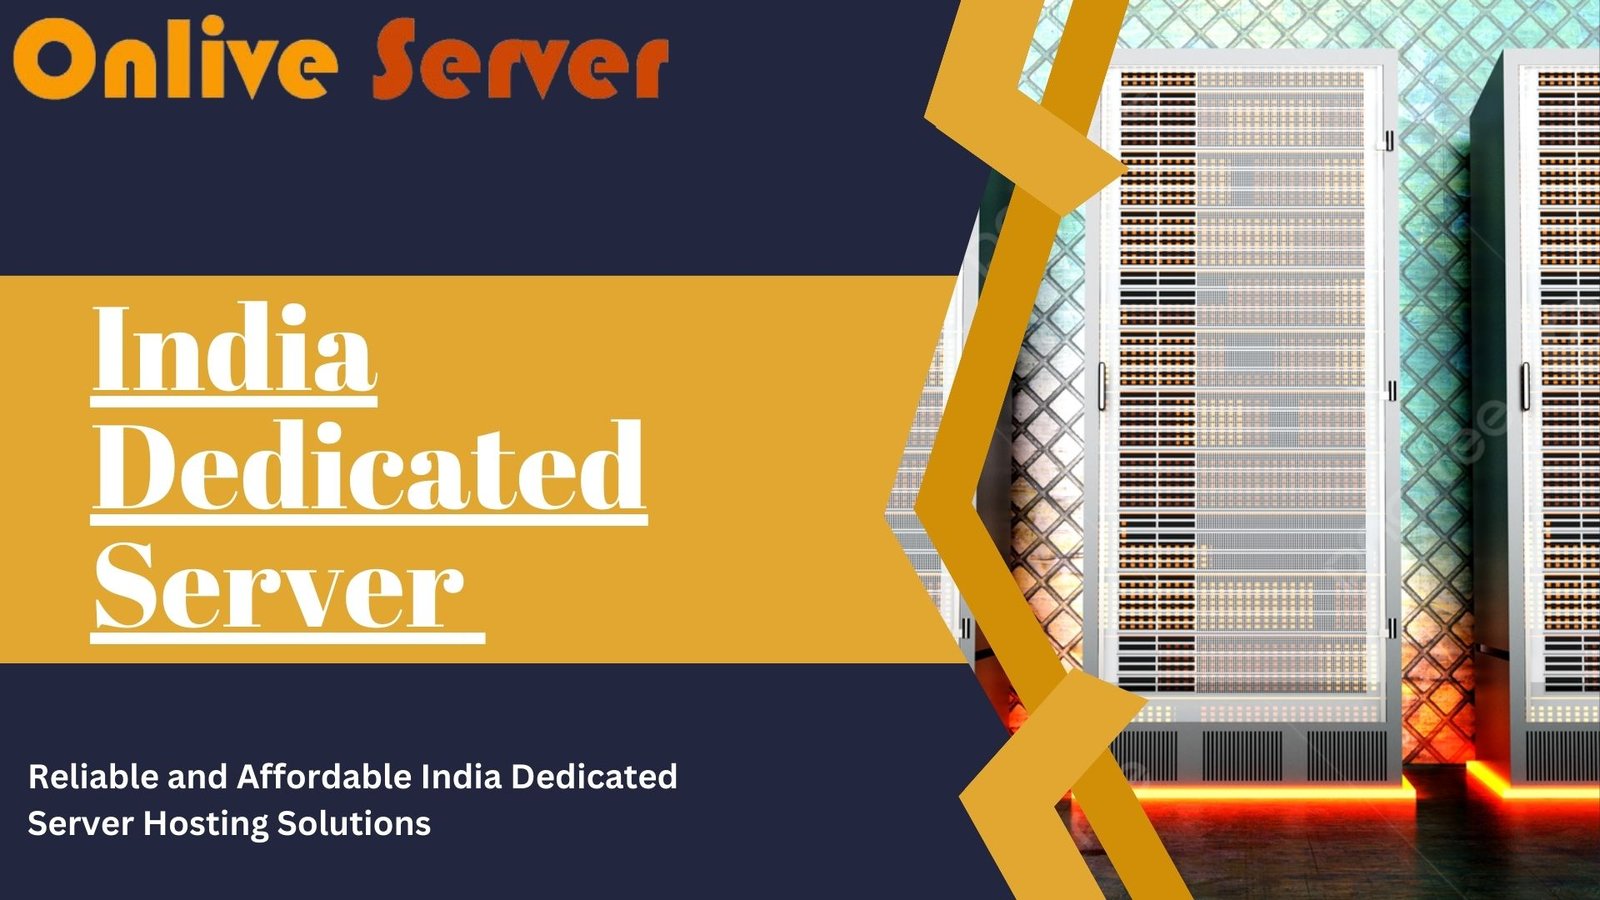 Reliable and Affordable India Dedicated Server Hosting Solutions